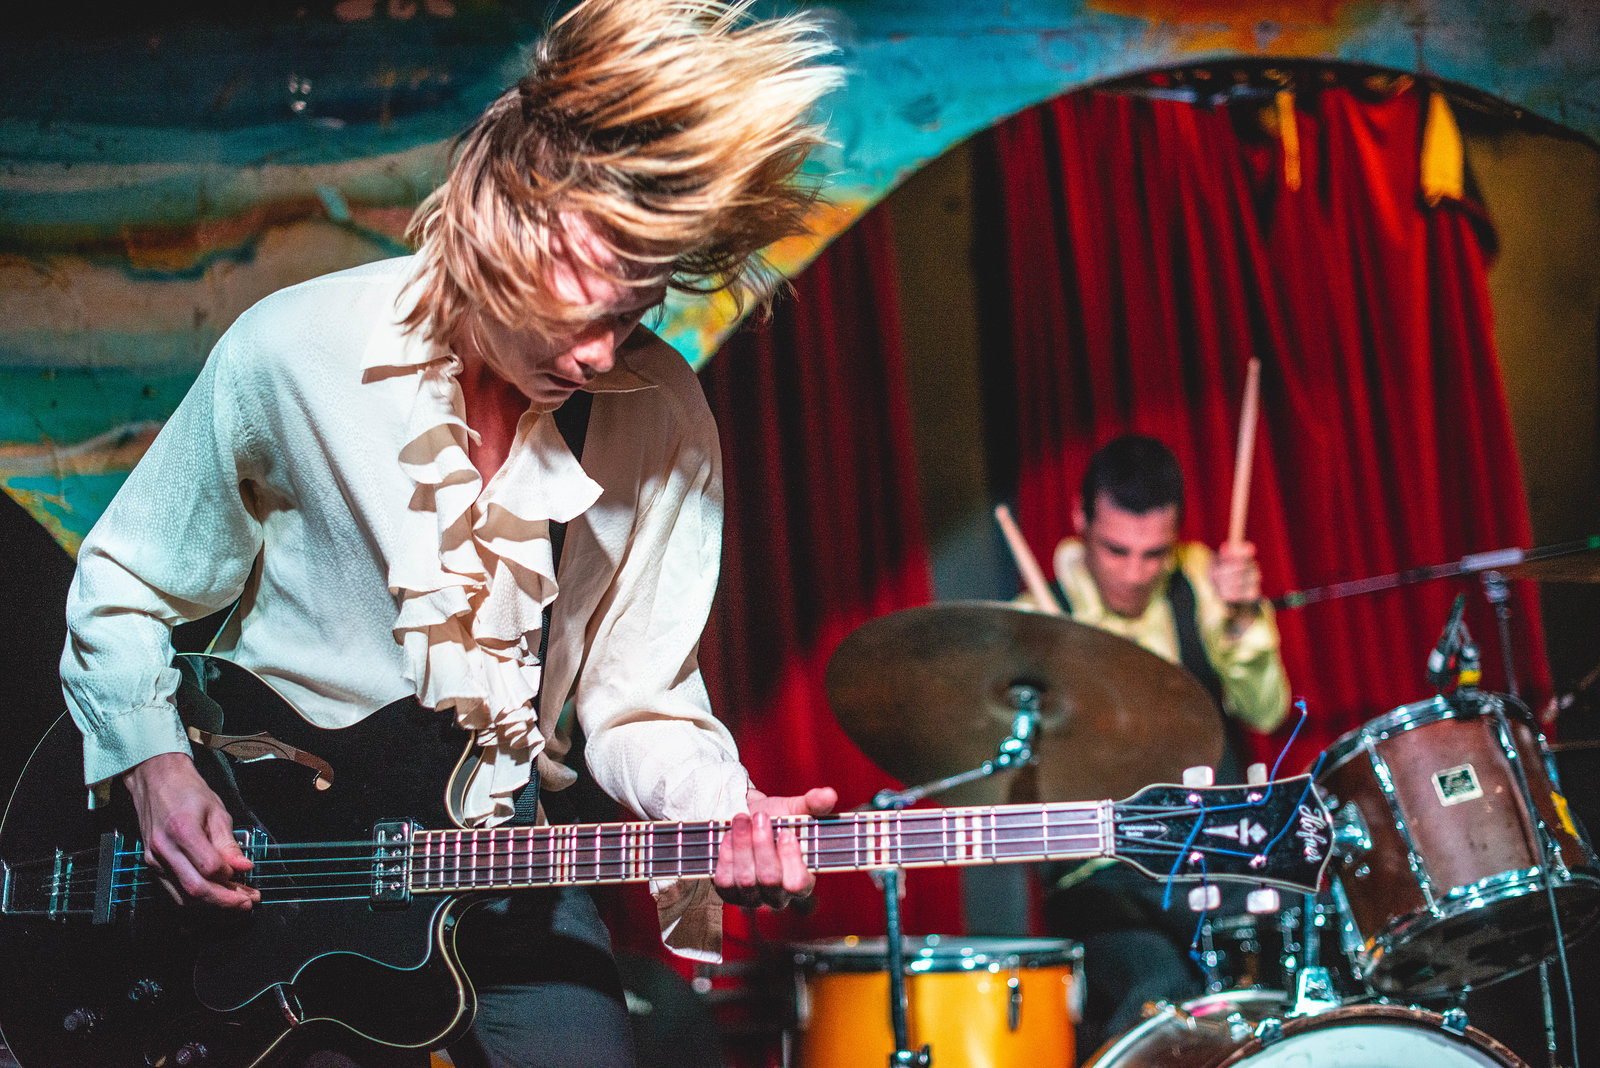 Beechwood at The Shacklewell Arms, London, June 2018